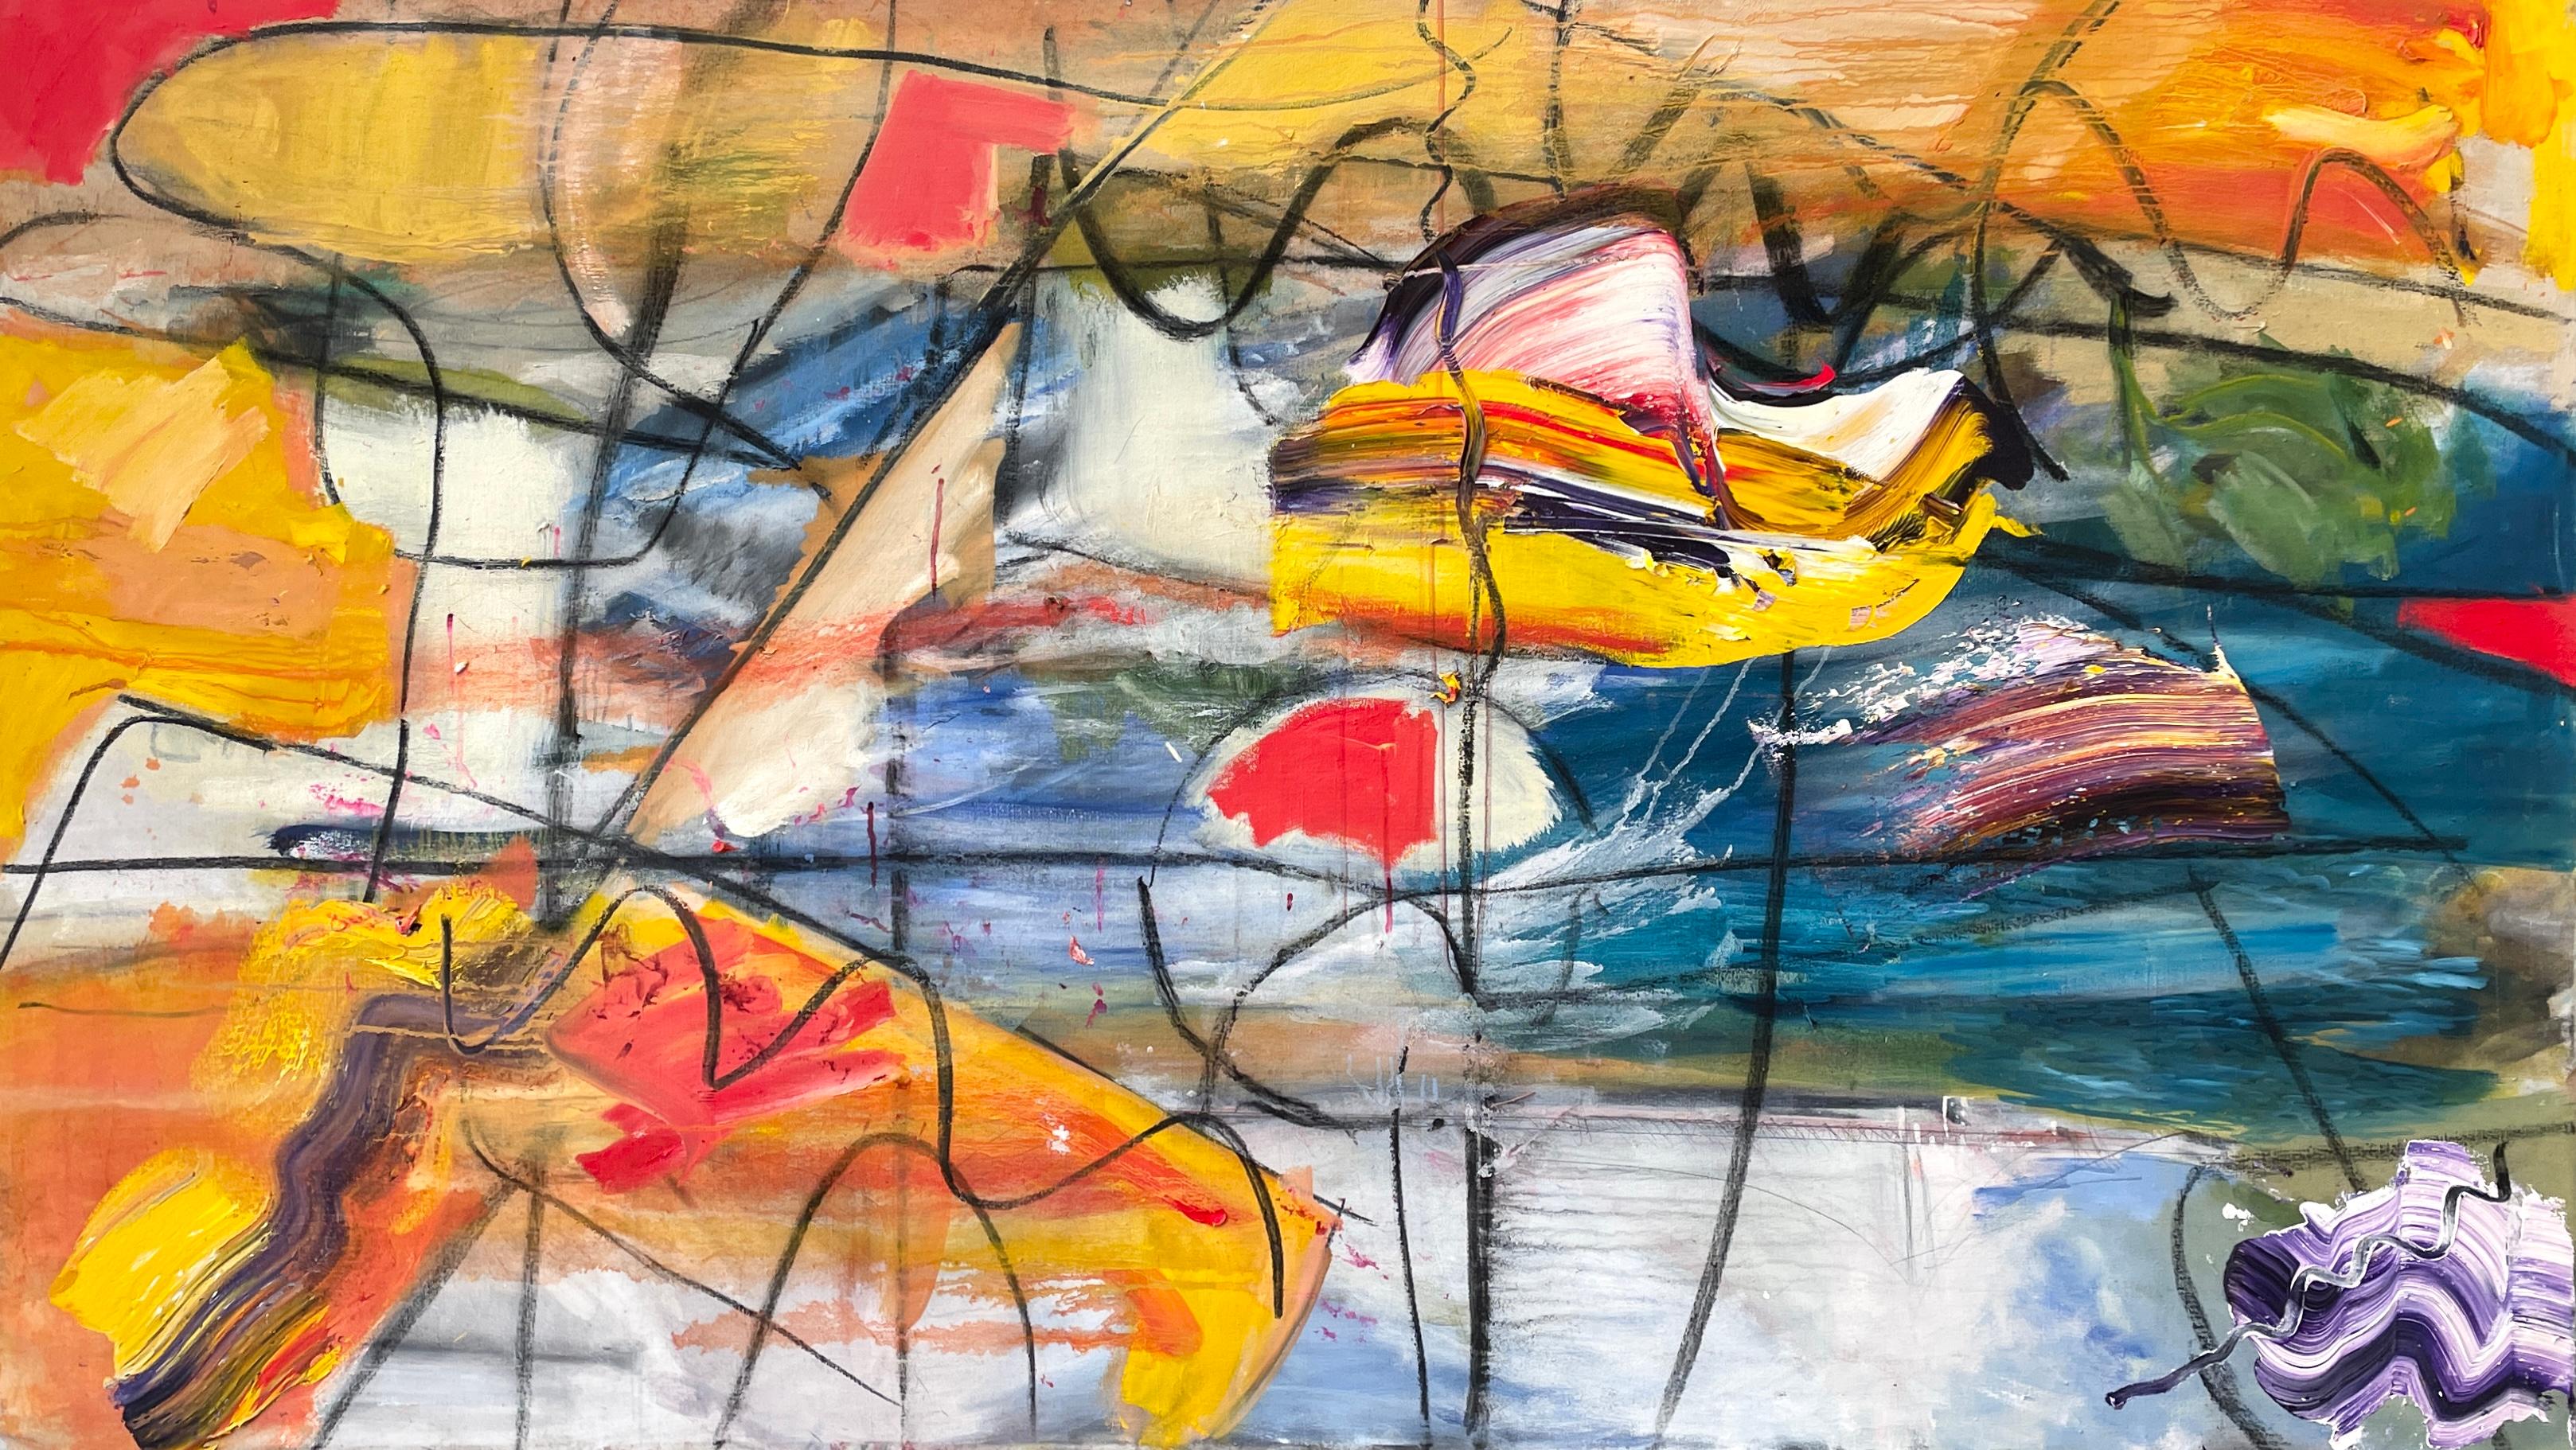 Steven H. Rehfeld's "All Over the Place" is a dynamic 42" x 72" abstract mixed media piece, reflecting the title's essence through a bold and unfettered composition. Its sprawling visuals showcase vibrant swatches of yellow, deep blues, and fiery